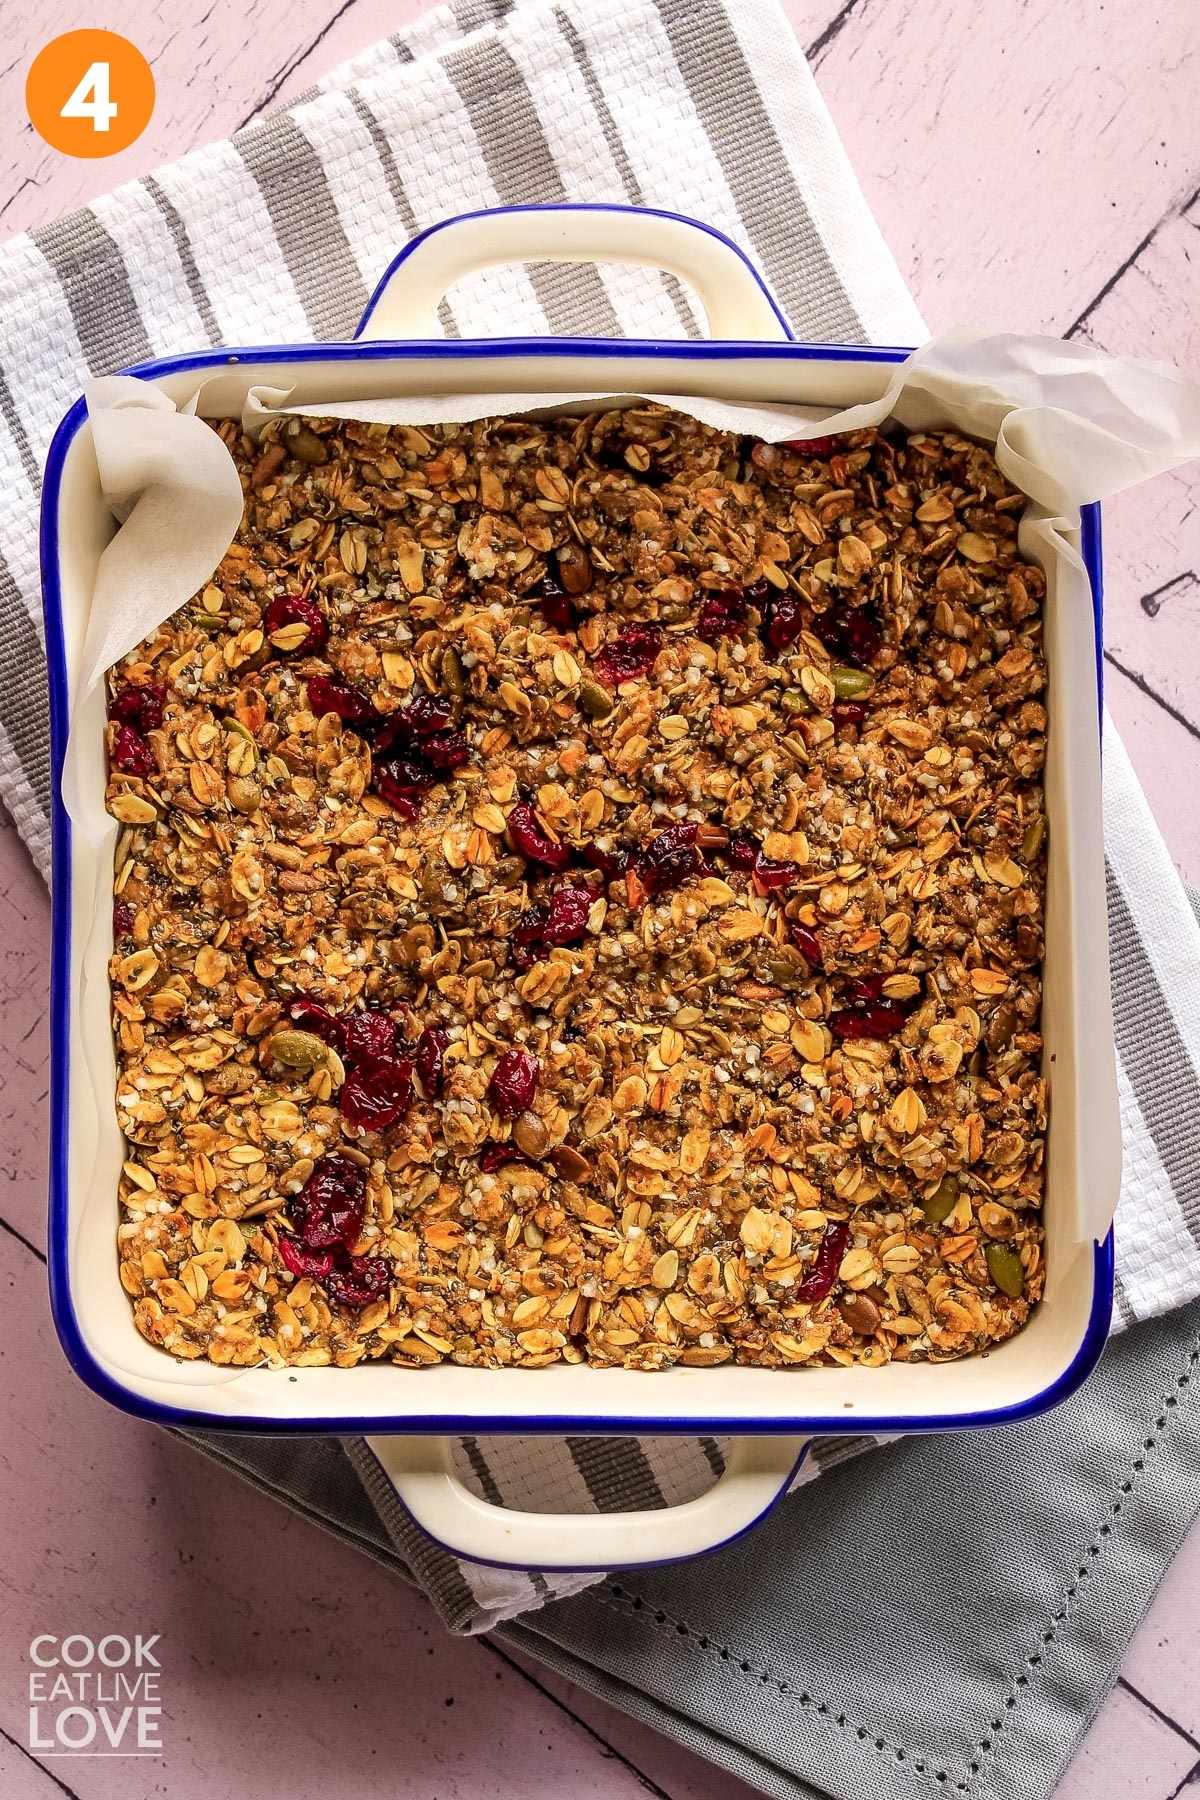 Vegan granola bar mixture is in square pan and pressed firmly down.